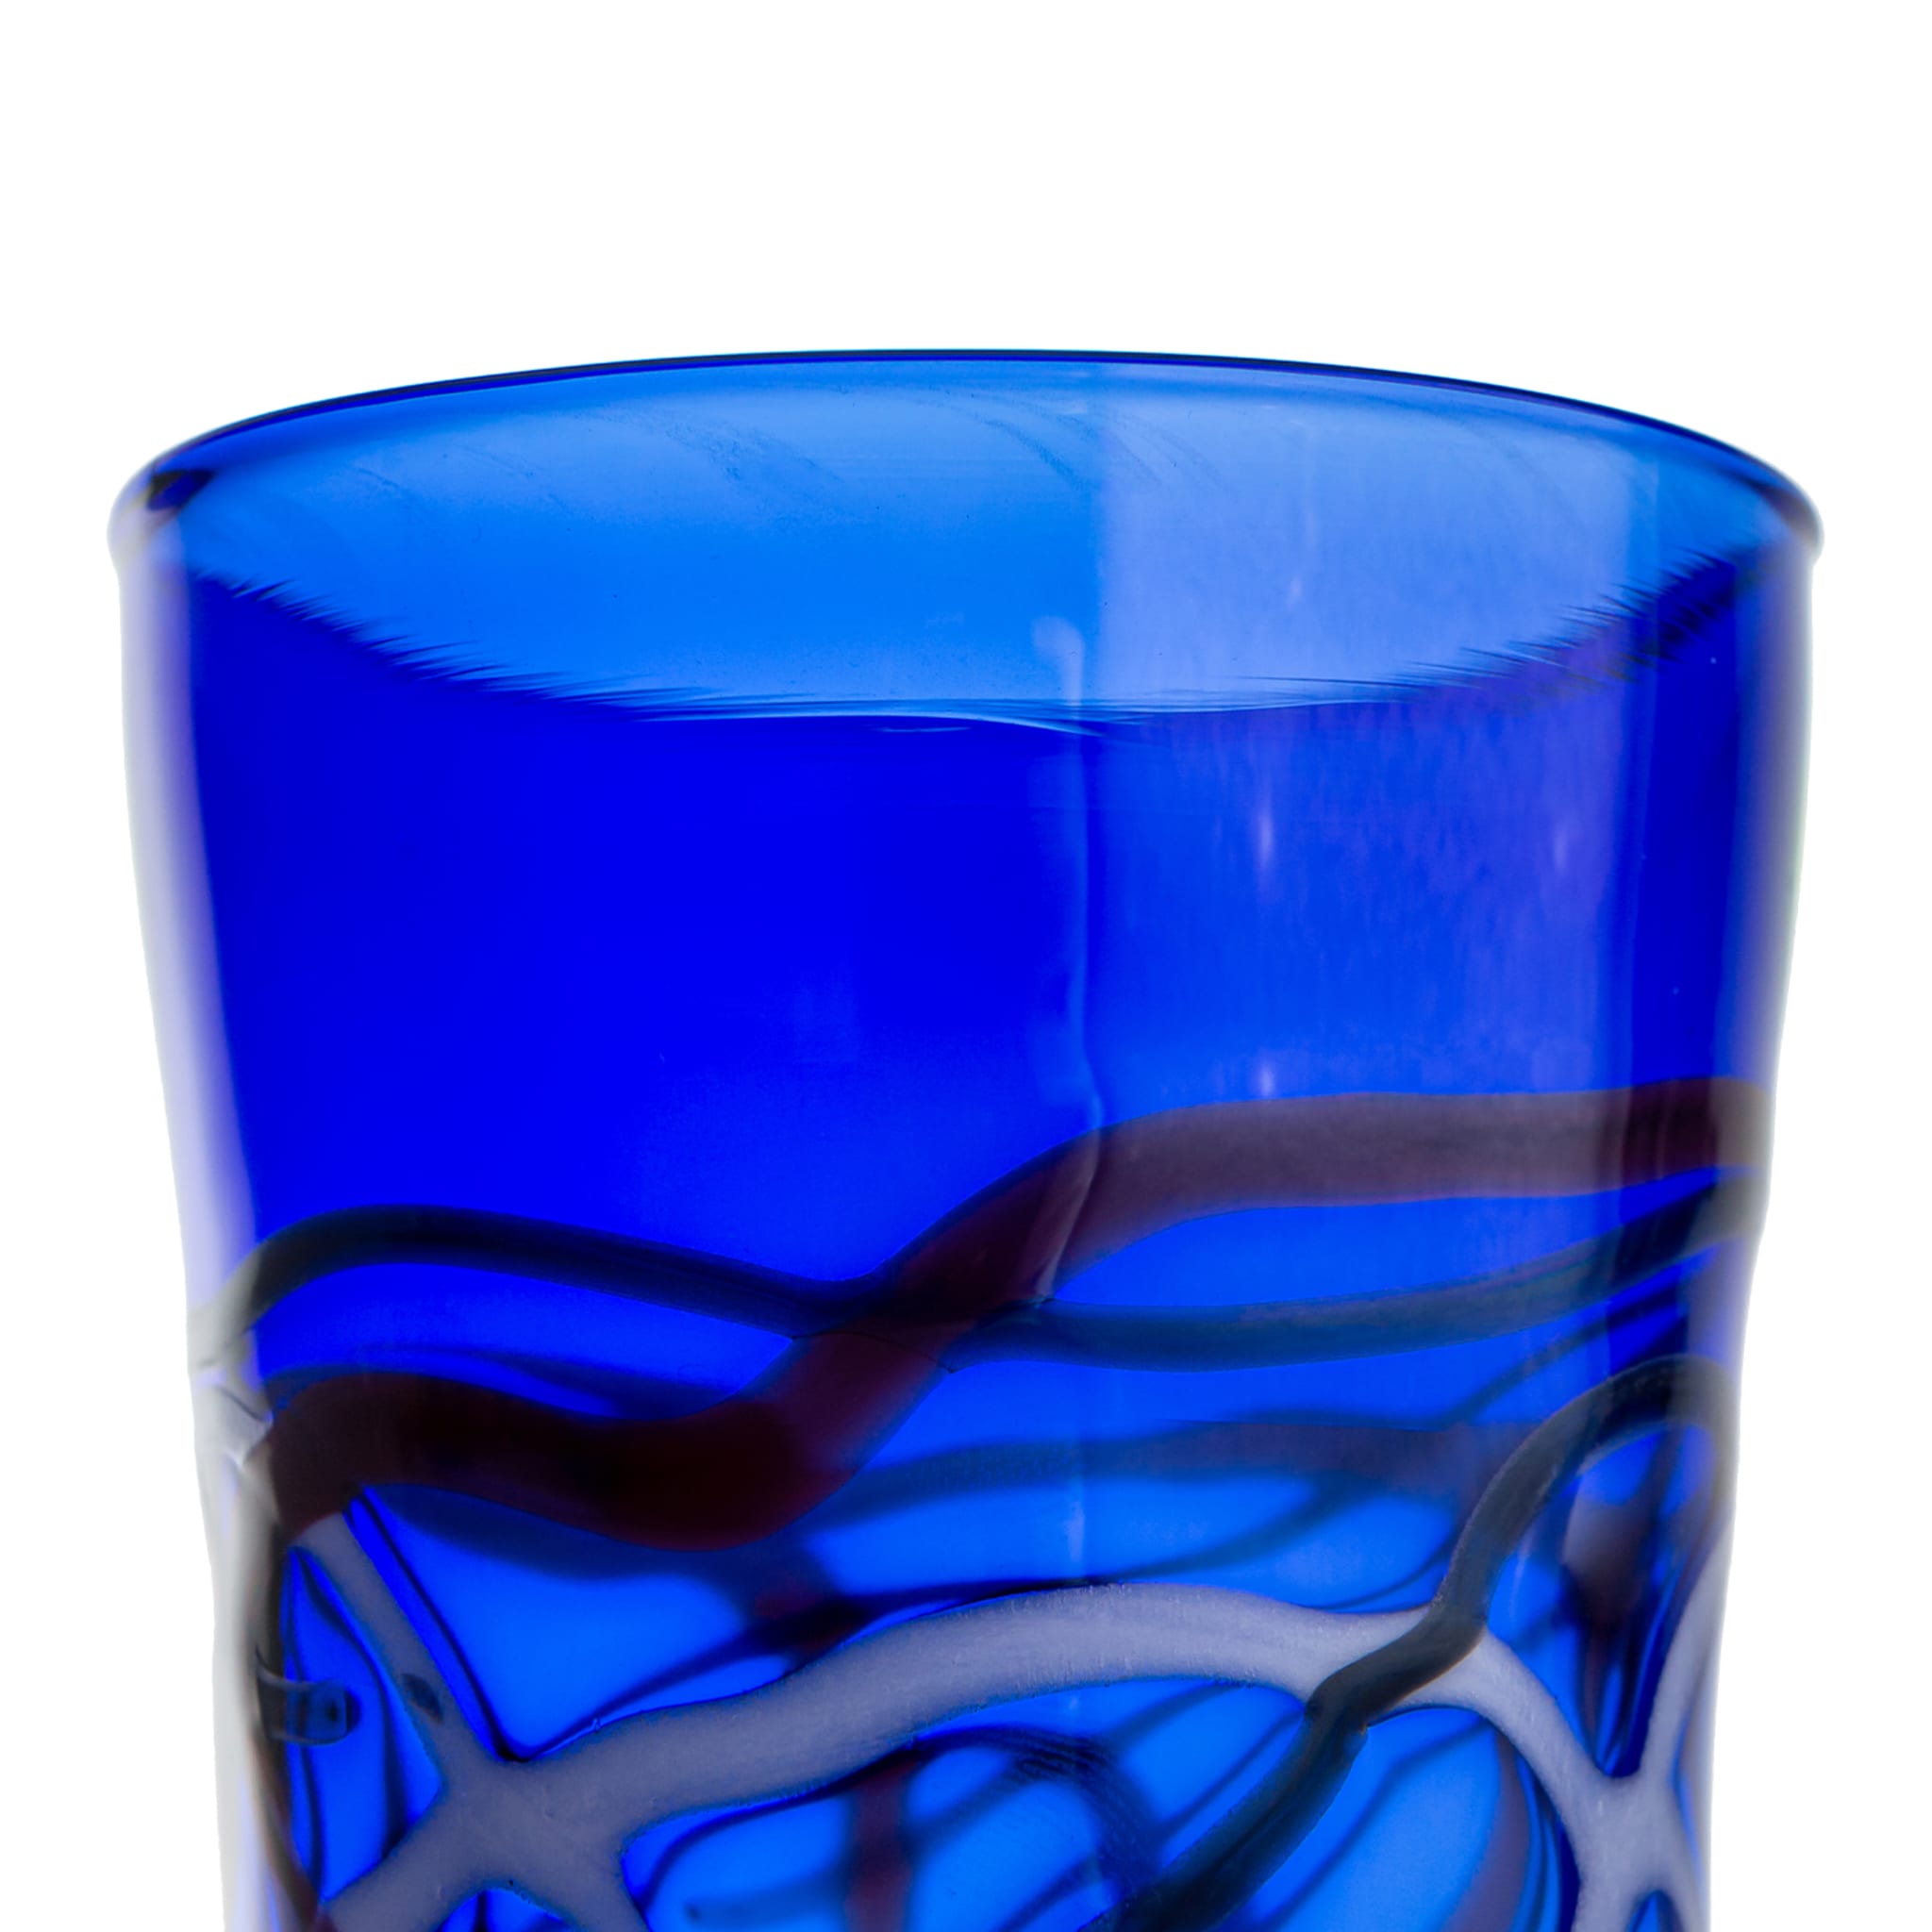 Set of two Diverso Blue Glasses - Alternative view 1